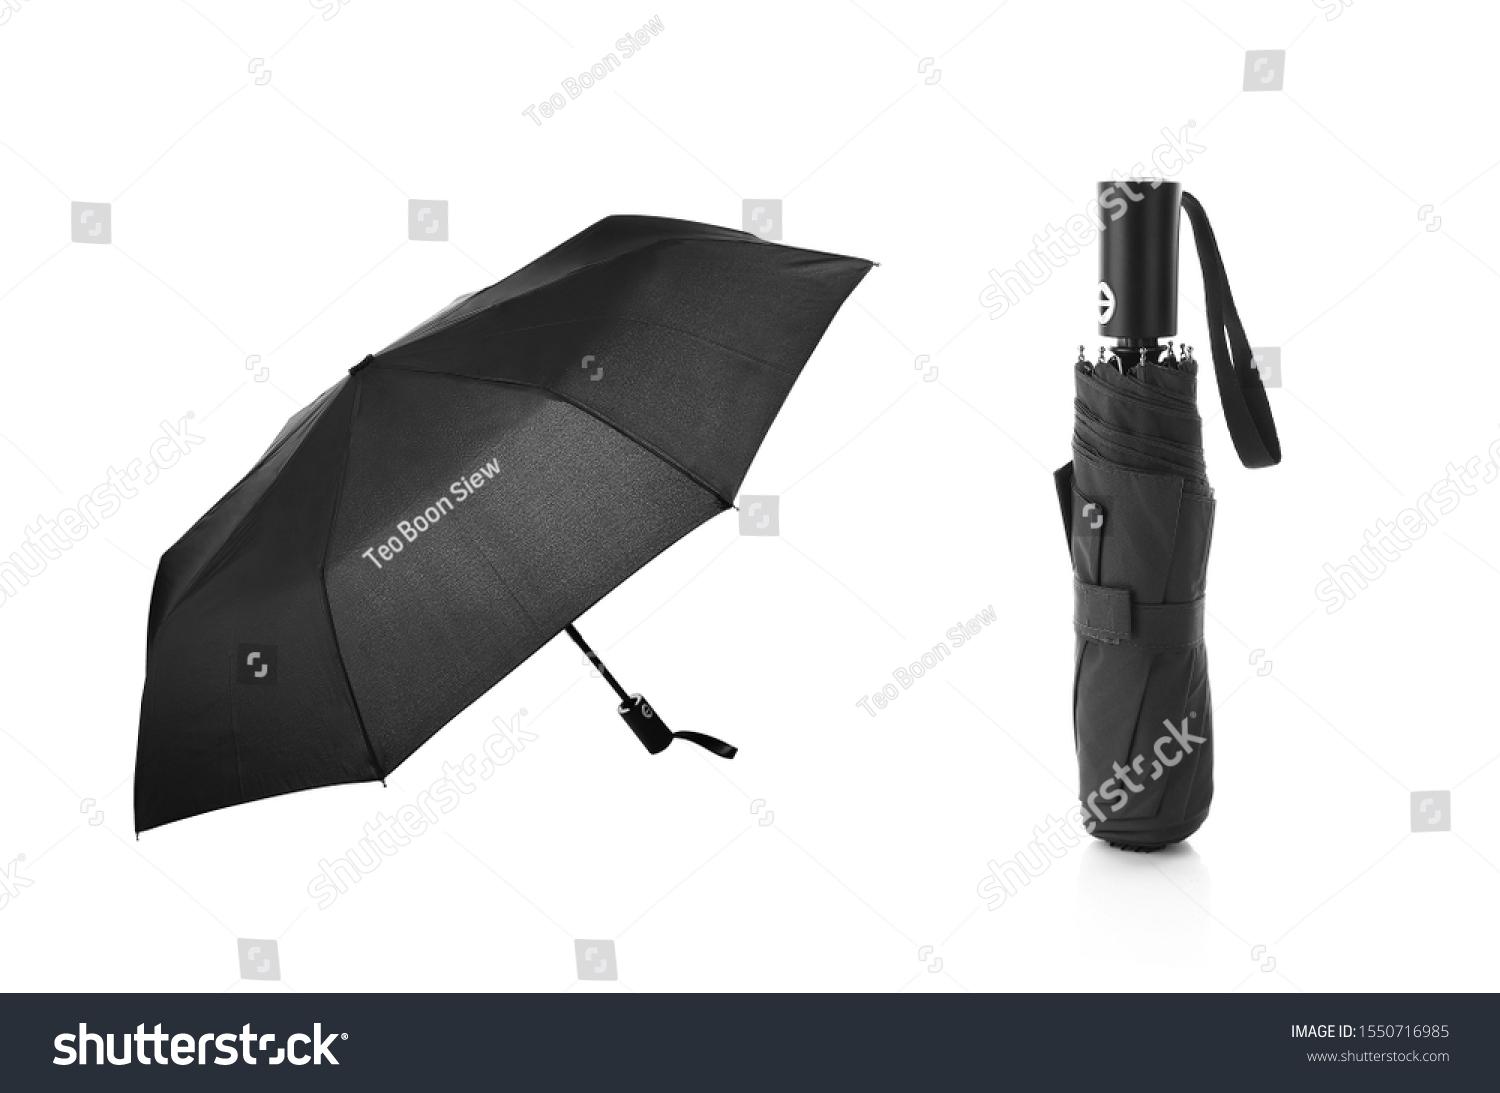 Set of Black Foldable Umbrella Isolated on White Background. Design Template for Mock-up, Branding, Advertise etc. Front and Closed View #1550716985